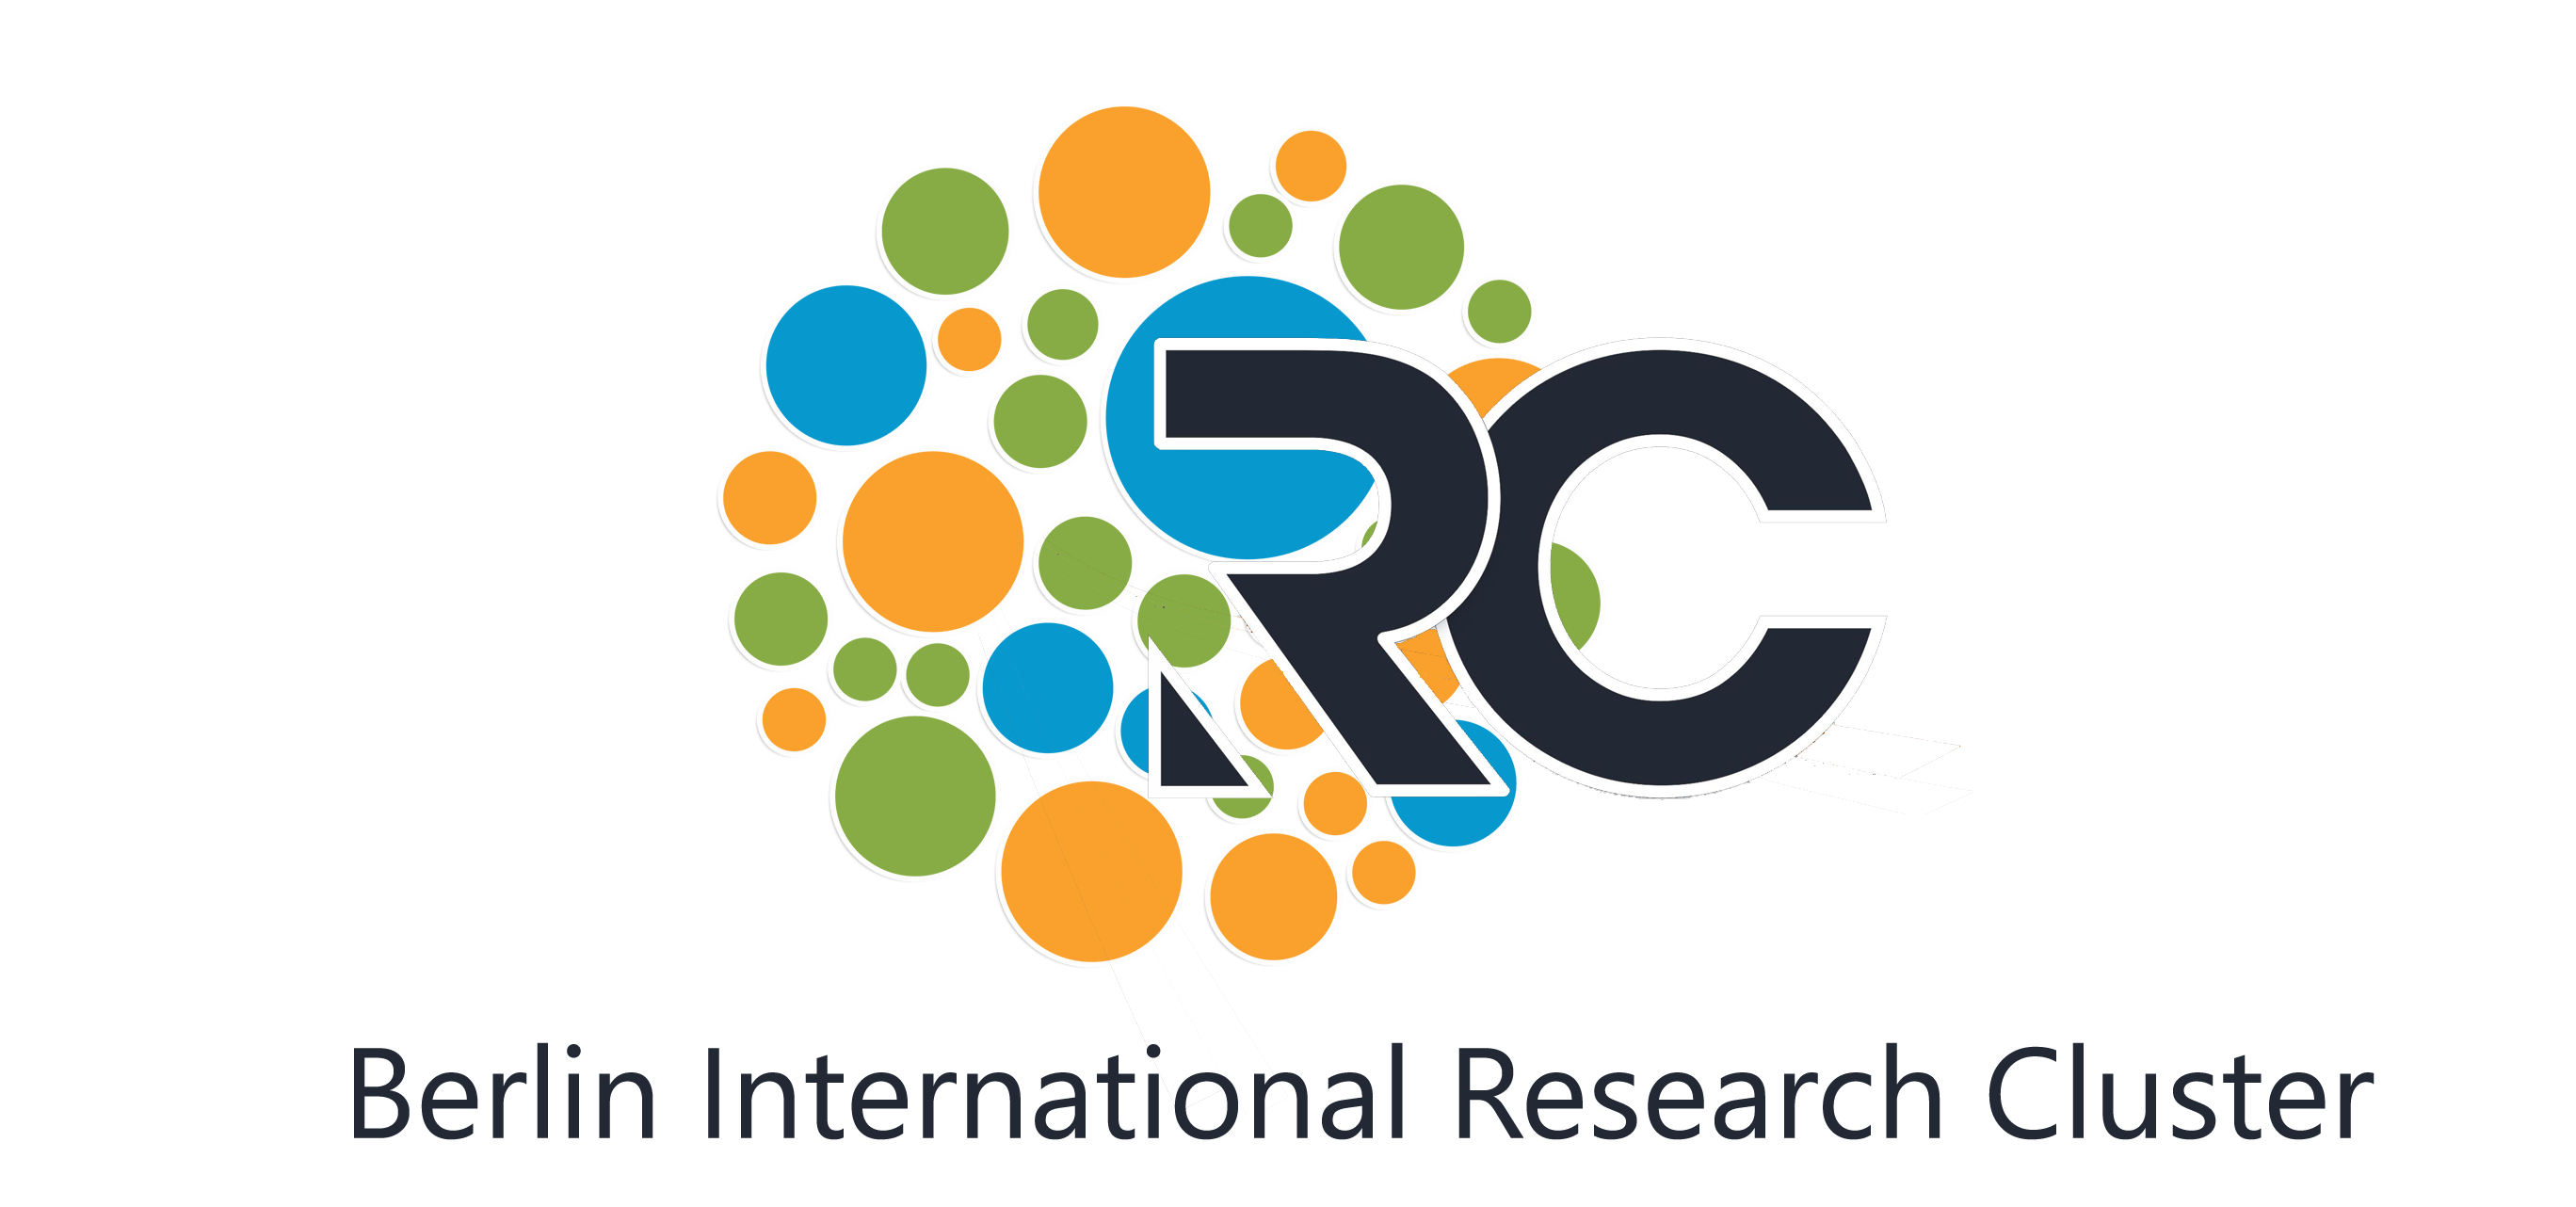 5th International Conference on Advance Research in the Field of Business, Economy and Social Science Research BESSR Singapore, Singapore